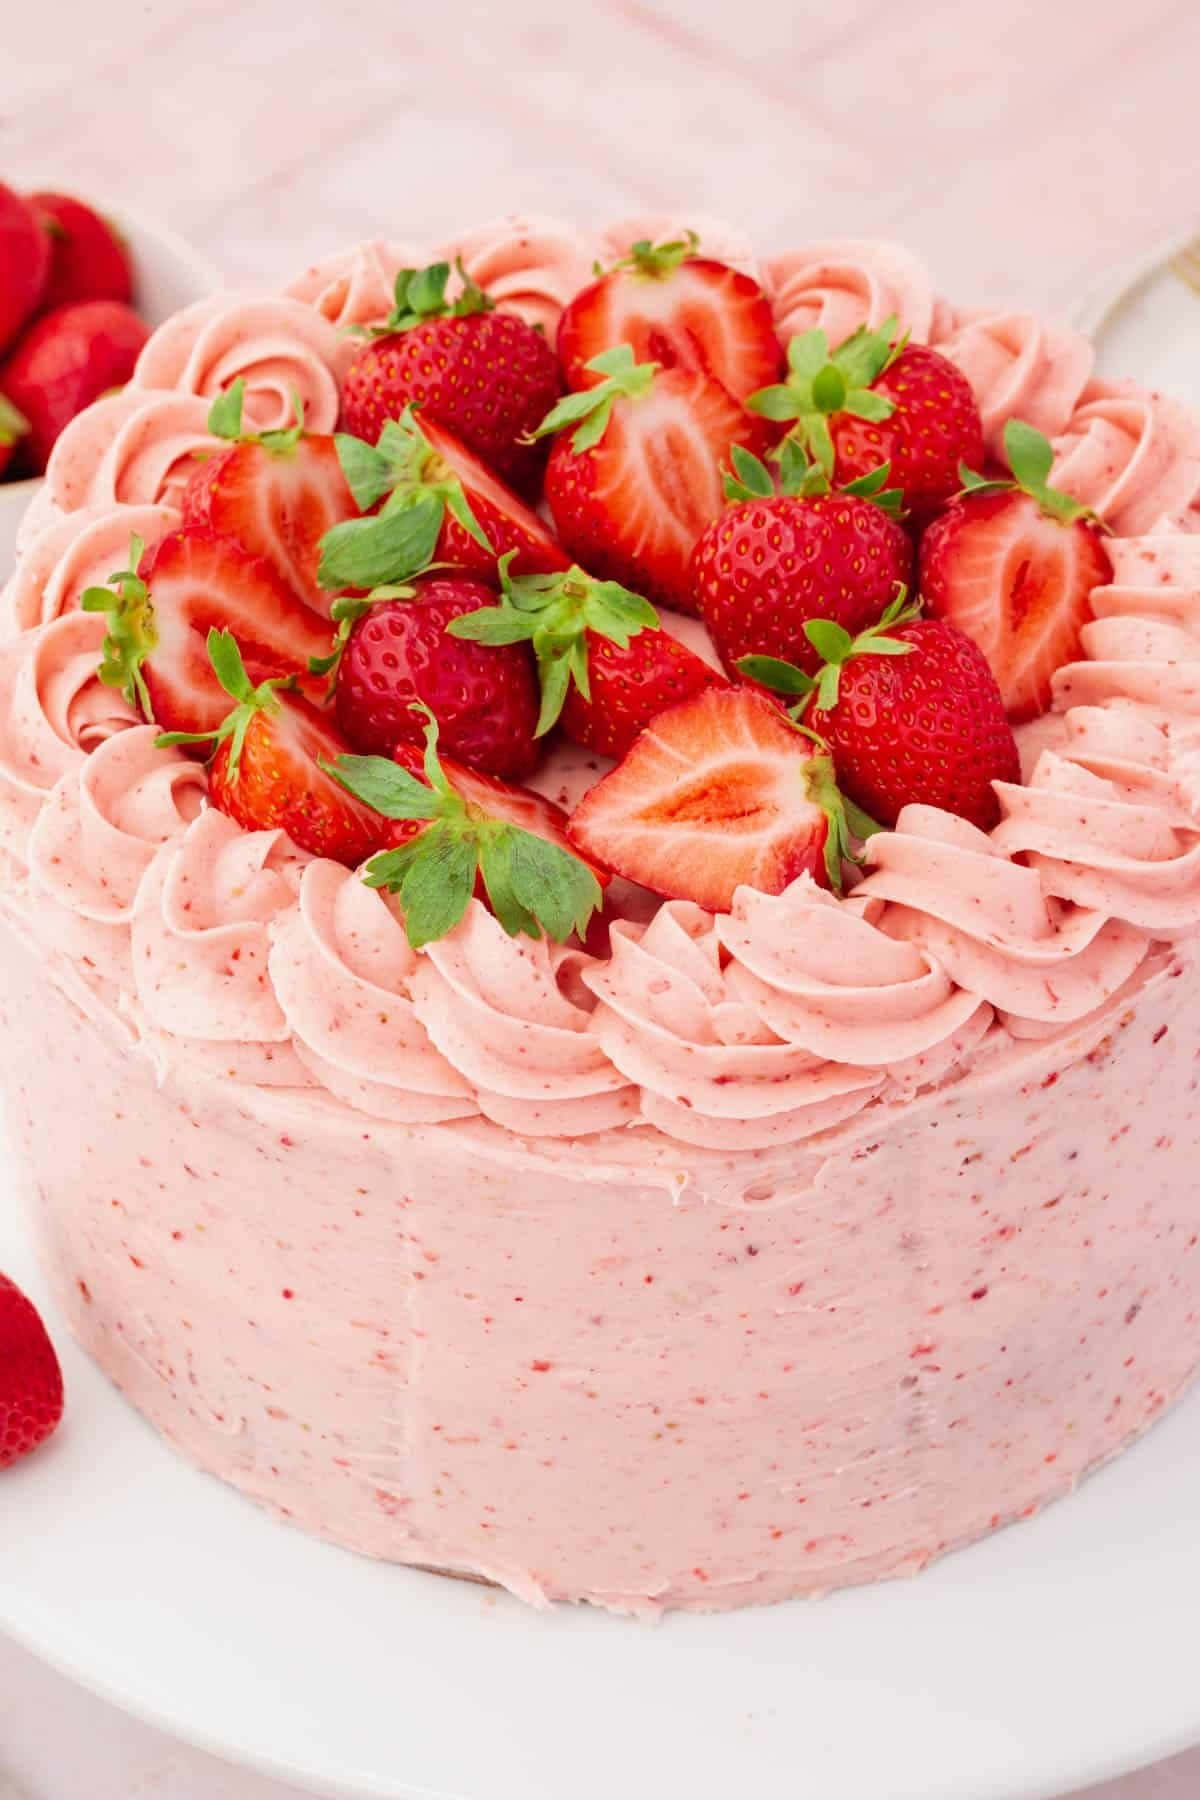 Strawberry Frosted Cakewith Fresh Strawberries Wallpaper